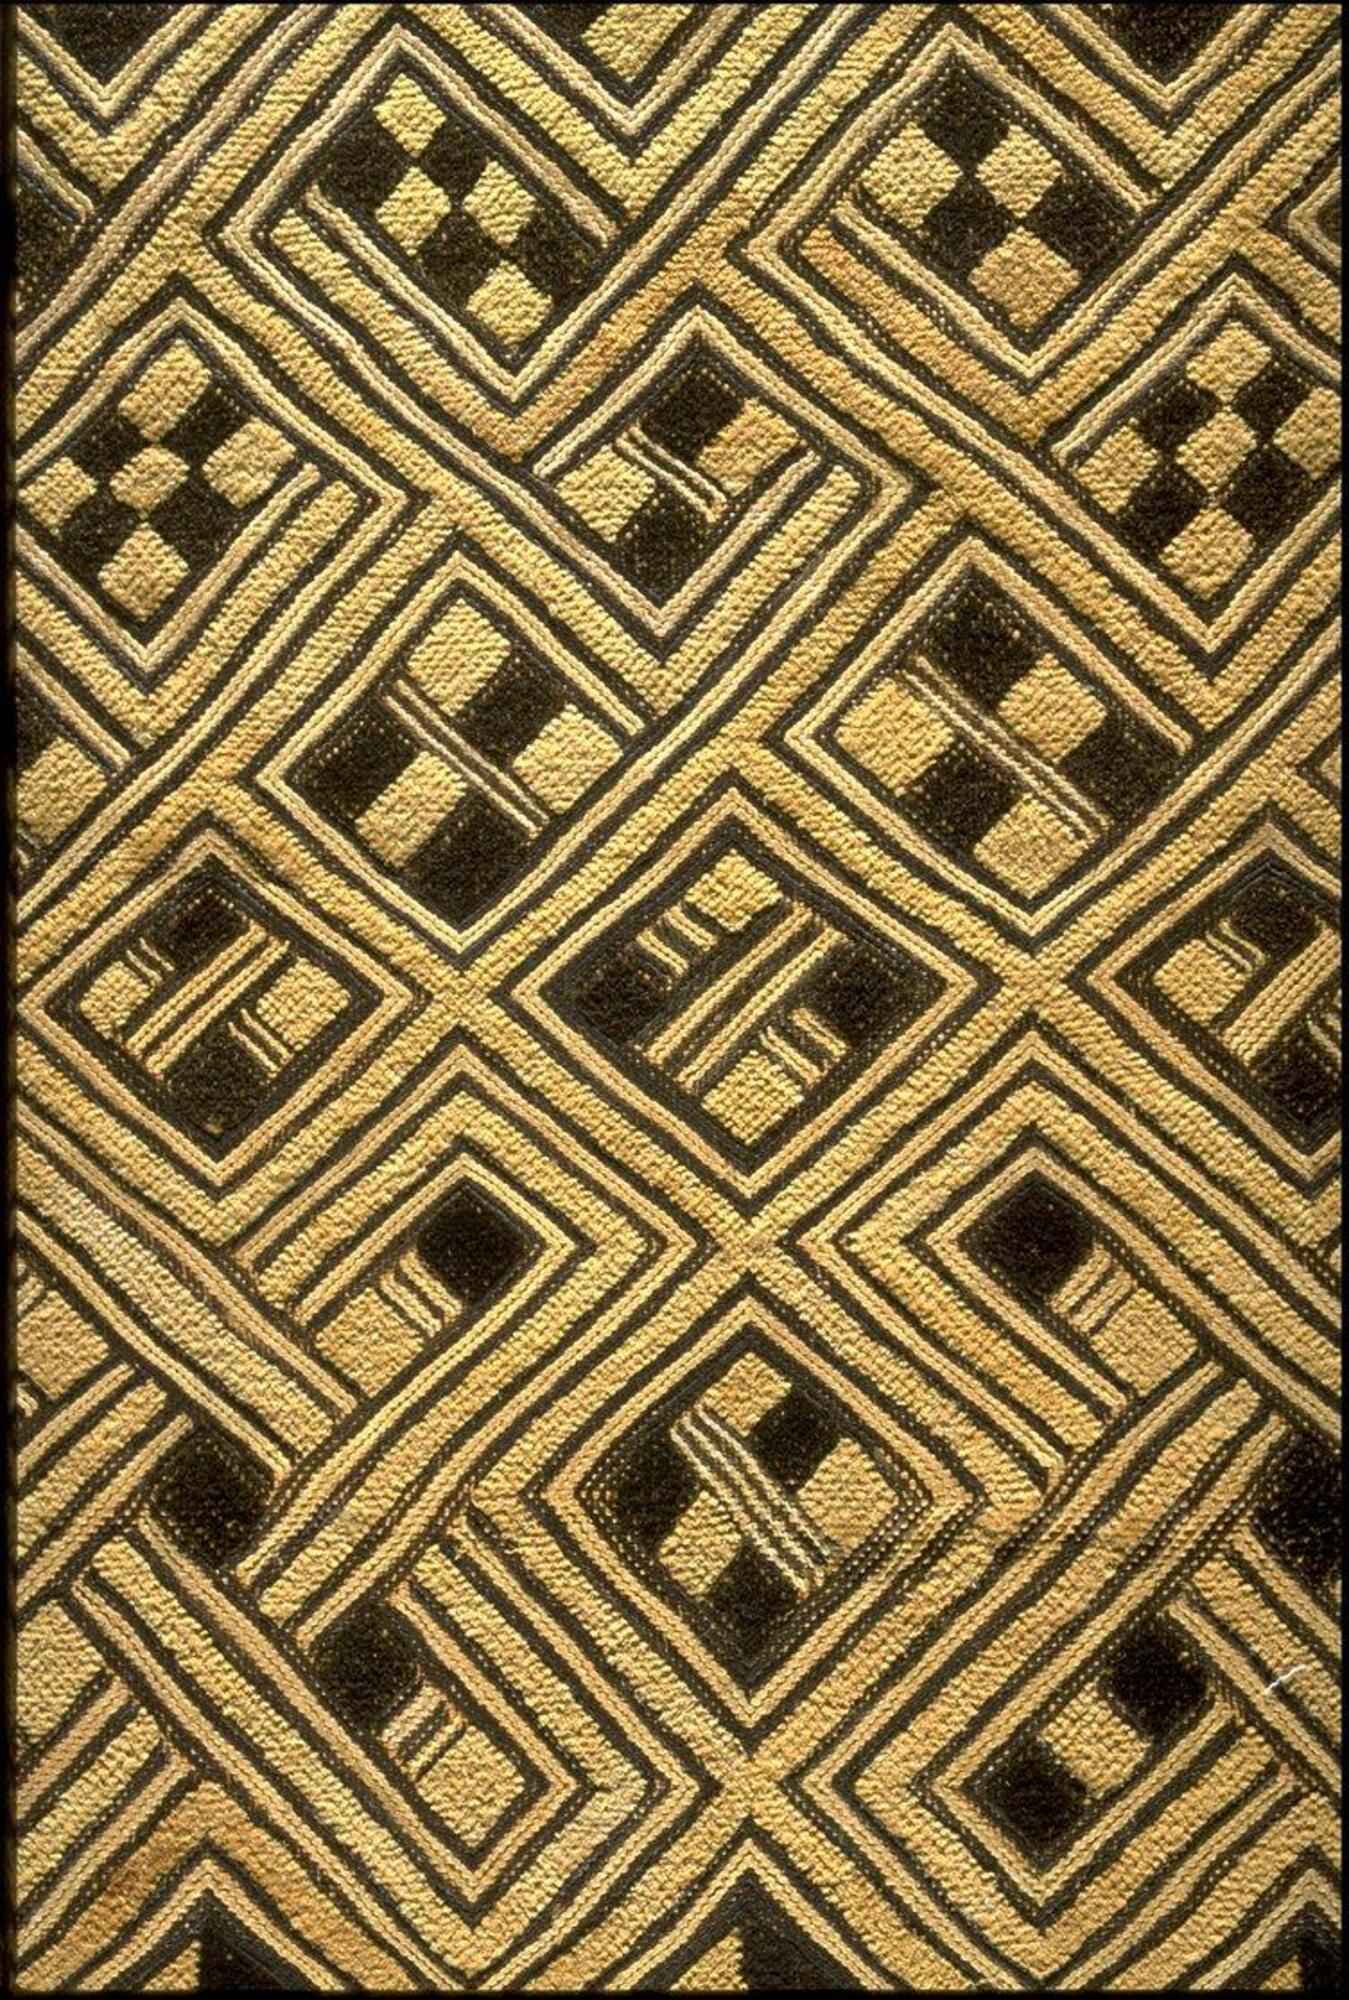 Square panel with intersecting lines that form a diamond pattern with checkered squares in between the intersected lines. 